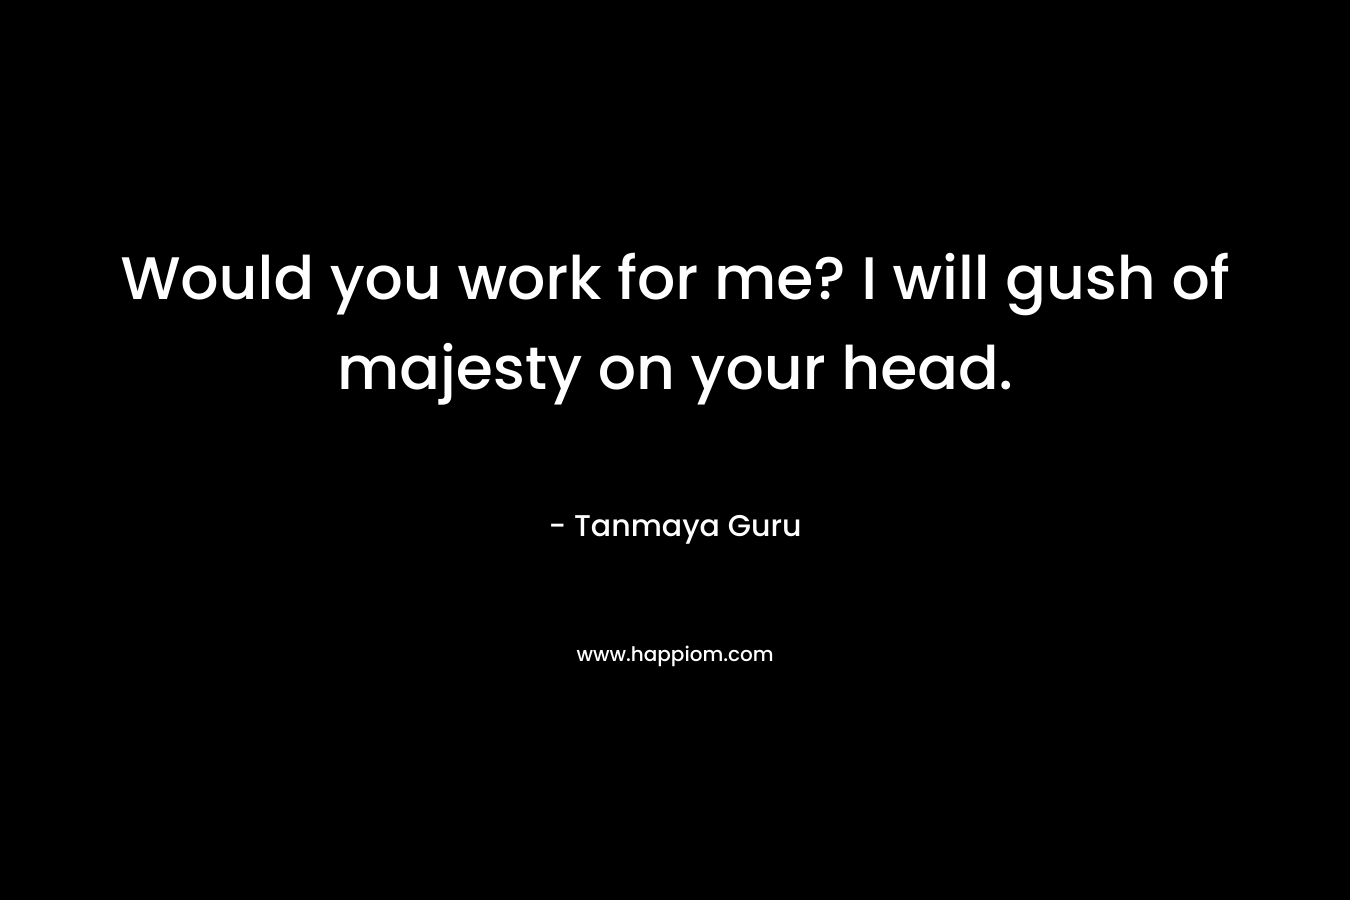 Would you work for me? I will gush of majesty on your head.